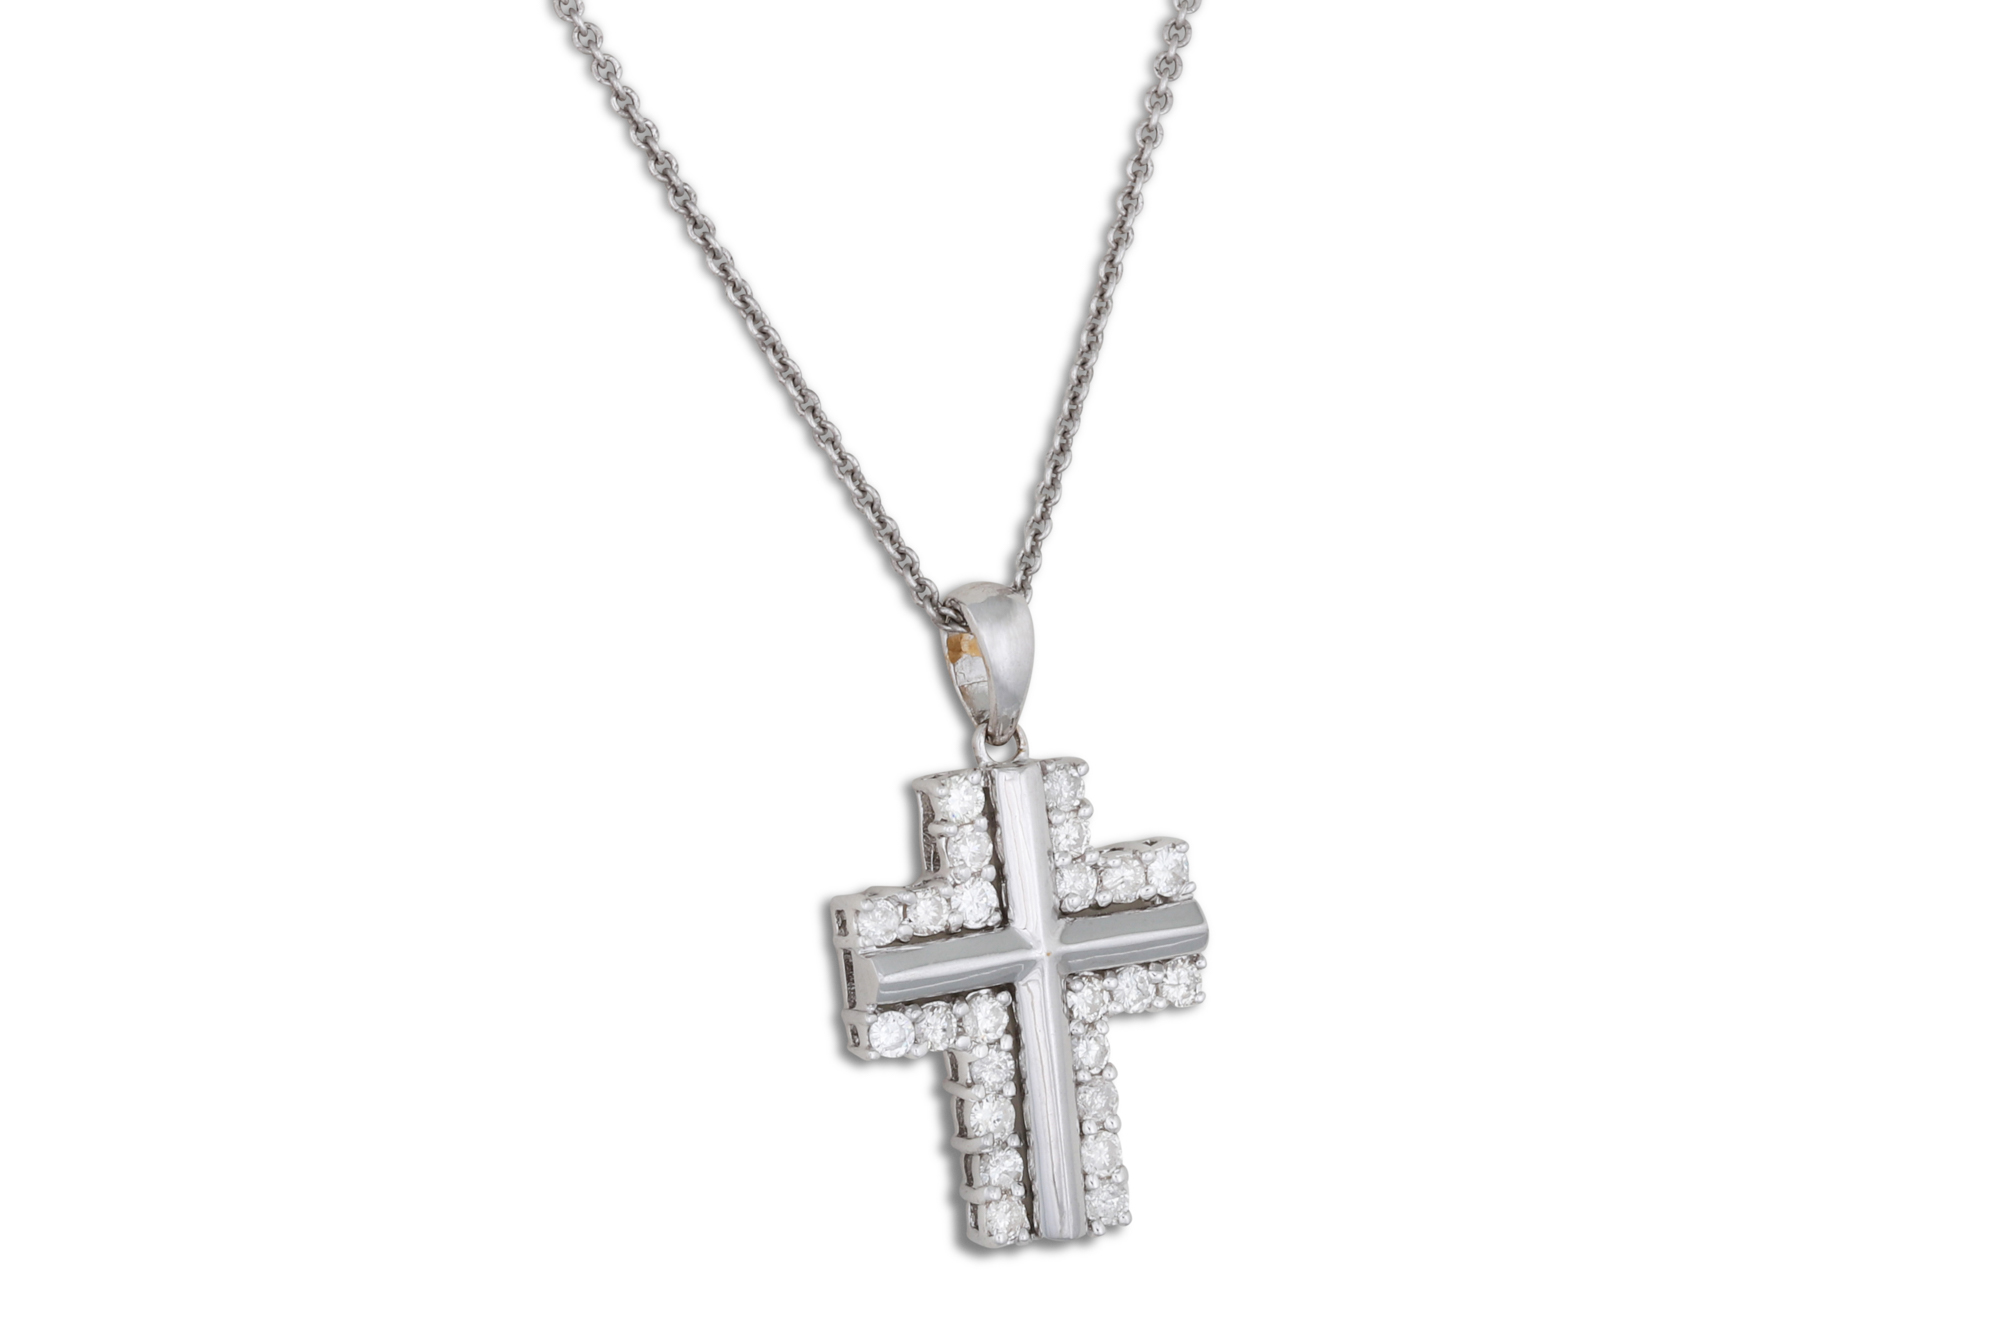 A DIAMOND SET CROSS, on a 9ct gold chain, mounted in 18ct white gold. Estimated: weight of diamonds: